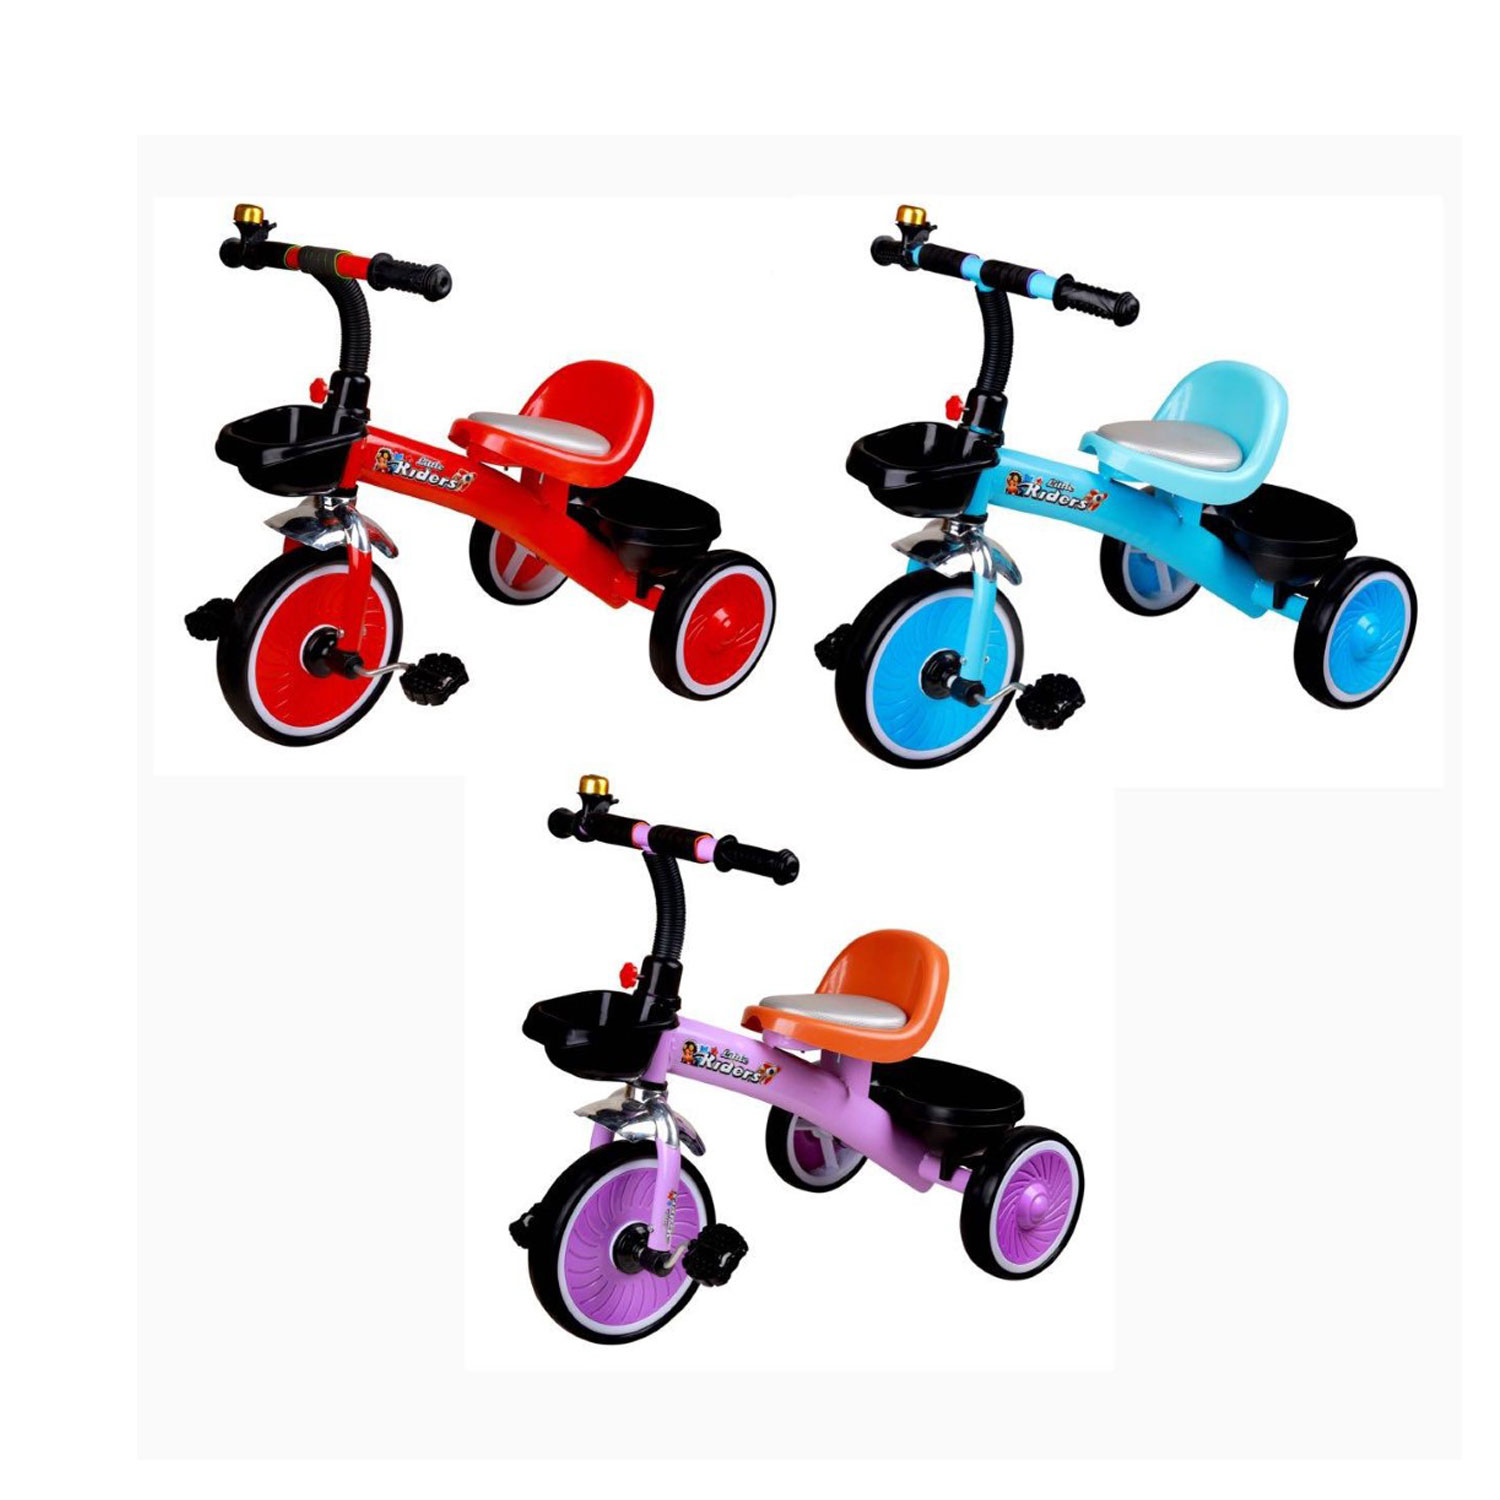 NAVRANGI BABY TRICYCLE FOR KIDS WITH FRONT OR BACK BASKET AND PARENT HANDLE. TRICYCLE FOR KIDS KBQ-171 